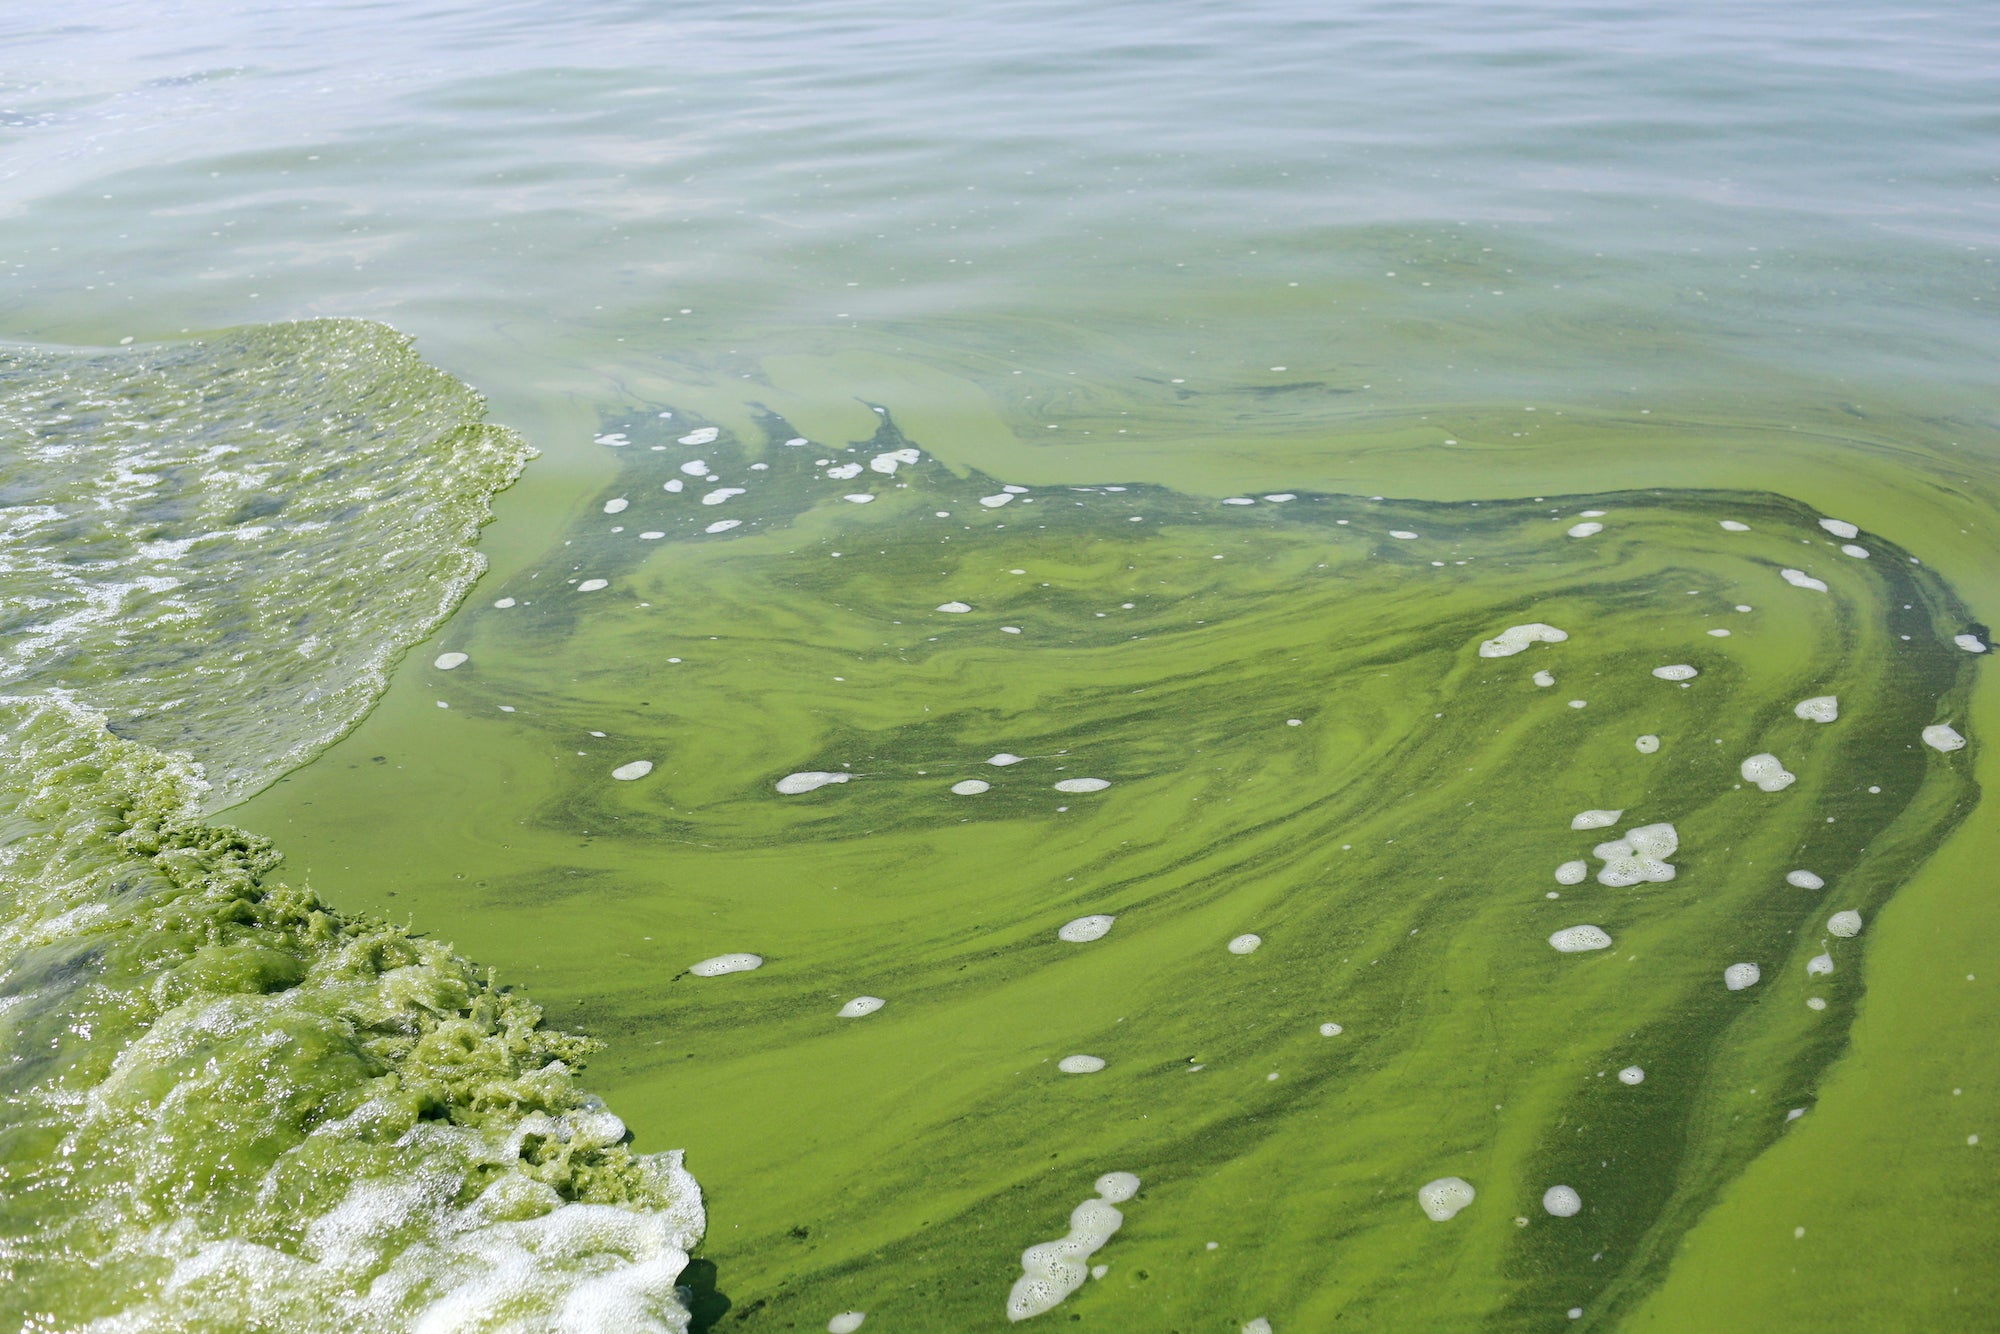 Bluegreen algae toxic levels found in South Jersey pond WHYY